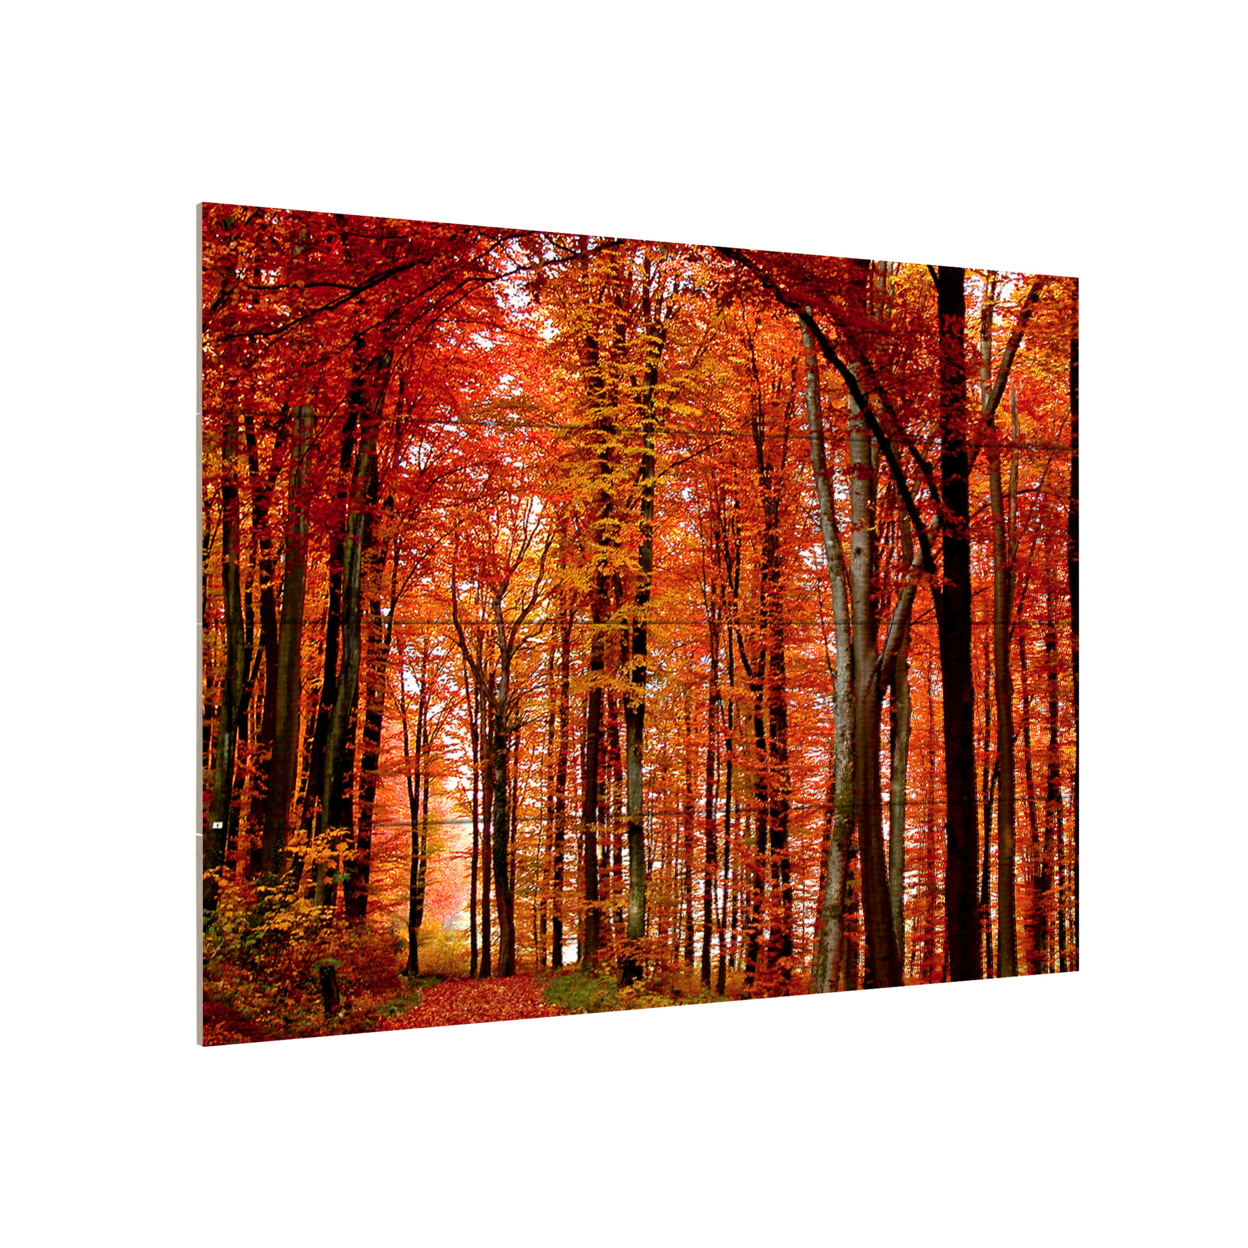 Wall Art 12 X 16 Inches Titled The Red Way Ready To Hang Printed On Wooden Planks